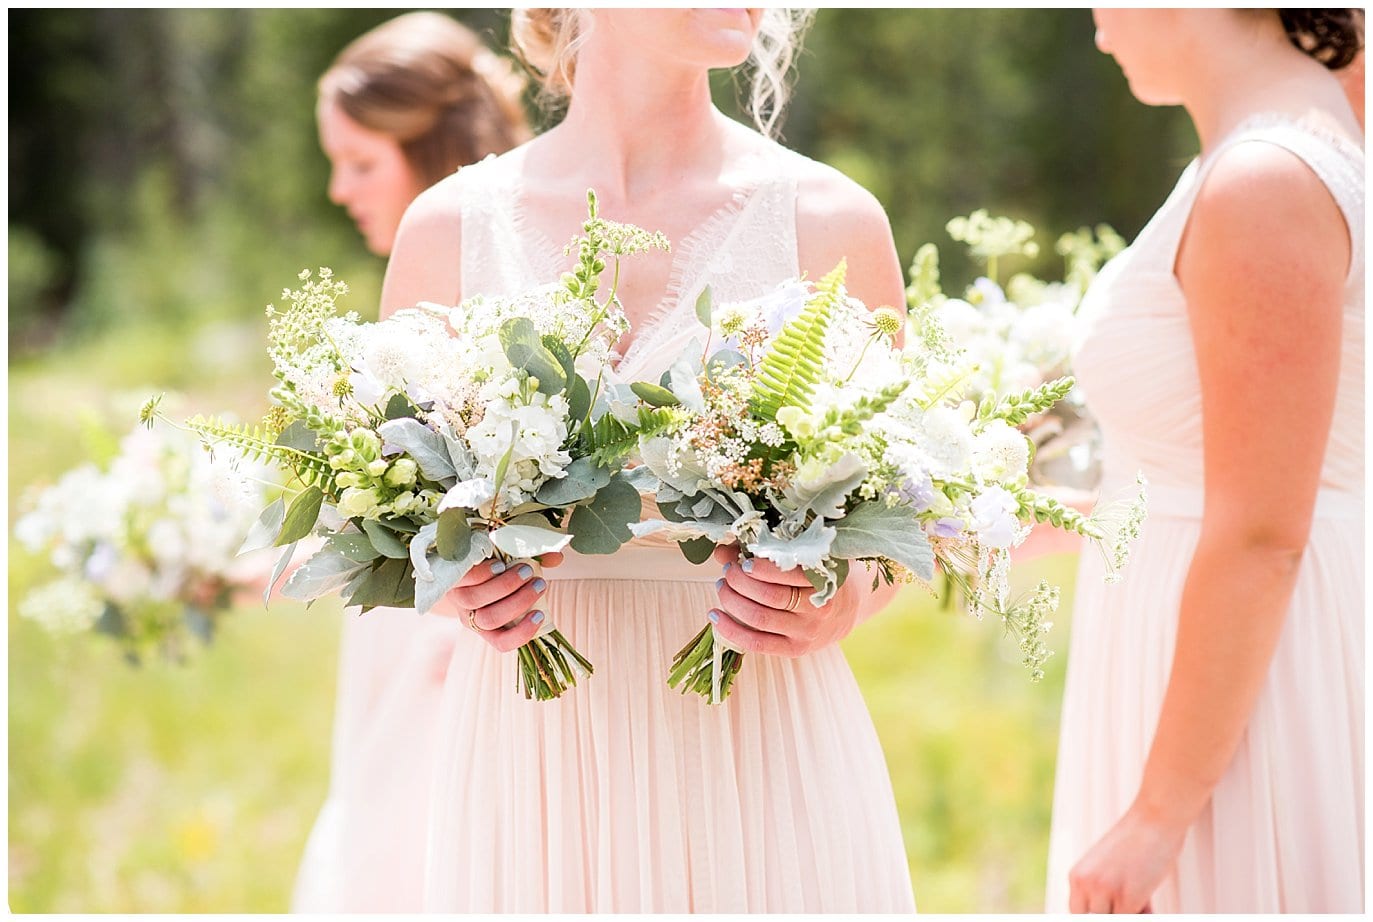 wildflower bouquets and blush bridesmaid dresses at Piney River Ranch wedding by Beaver Creek Wedding photographer Jennie Crate, Photographer